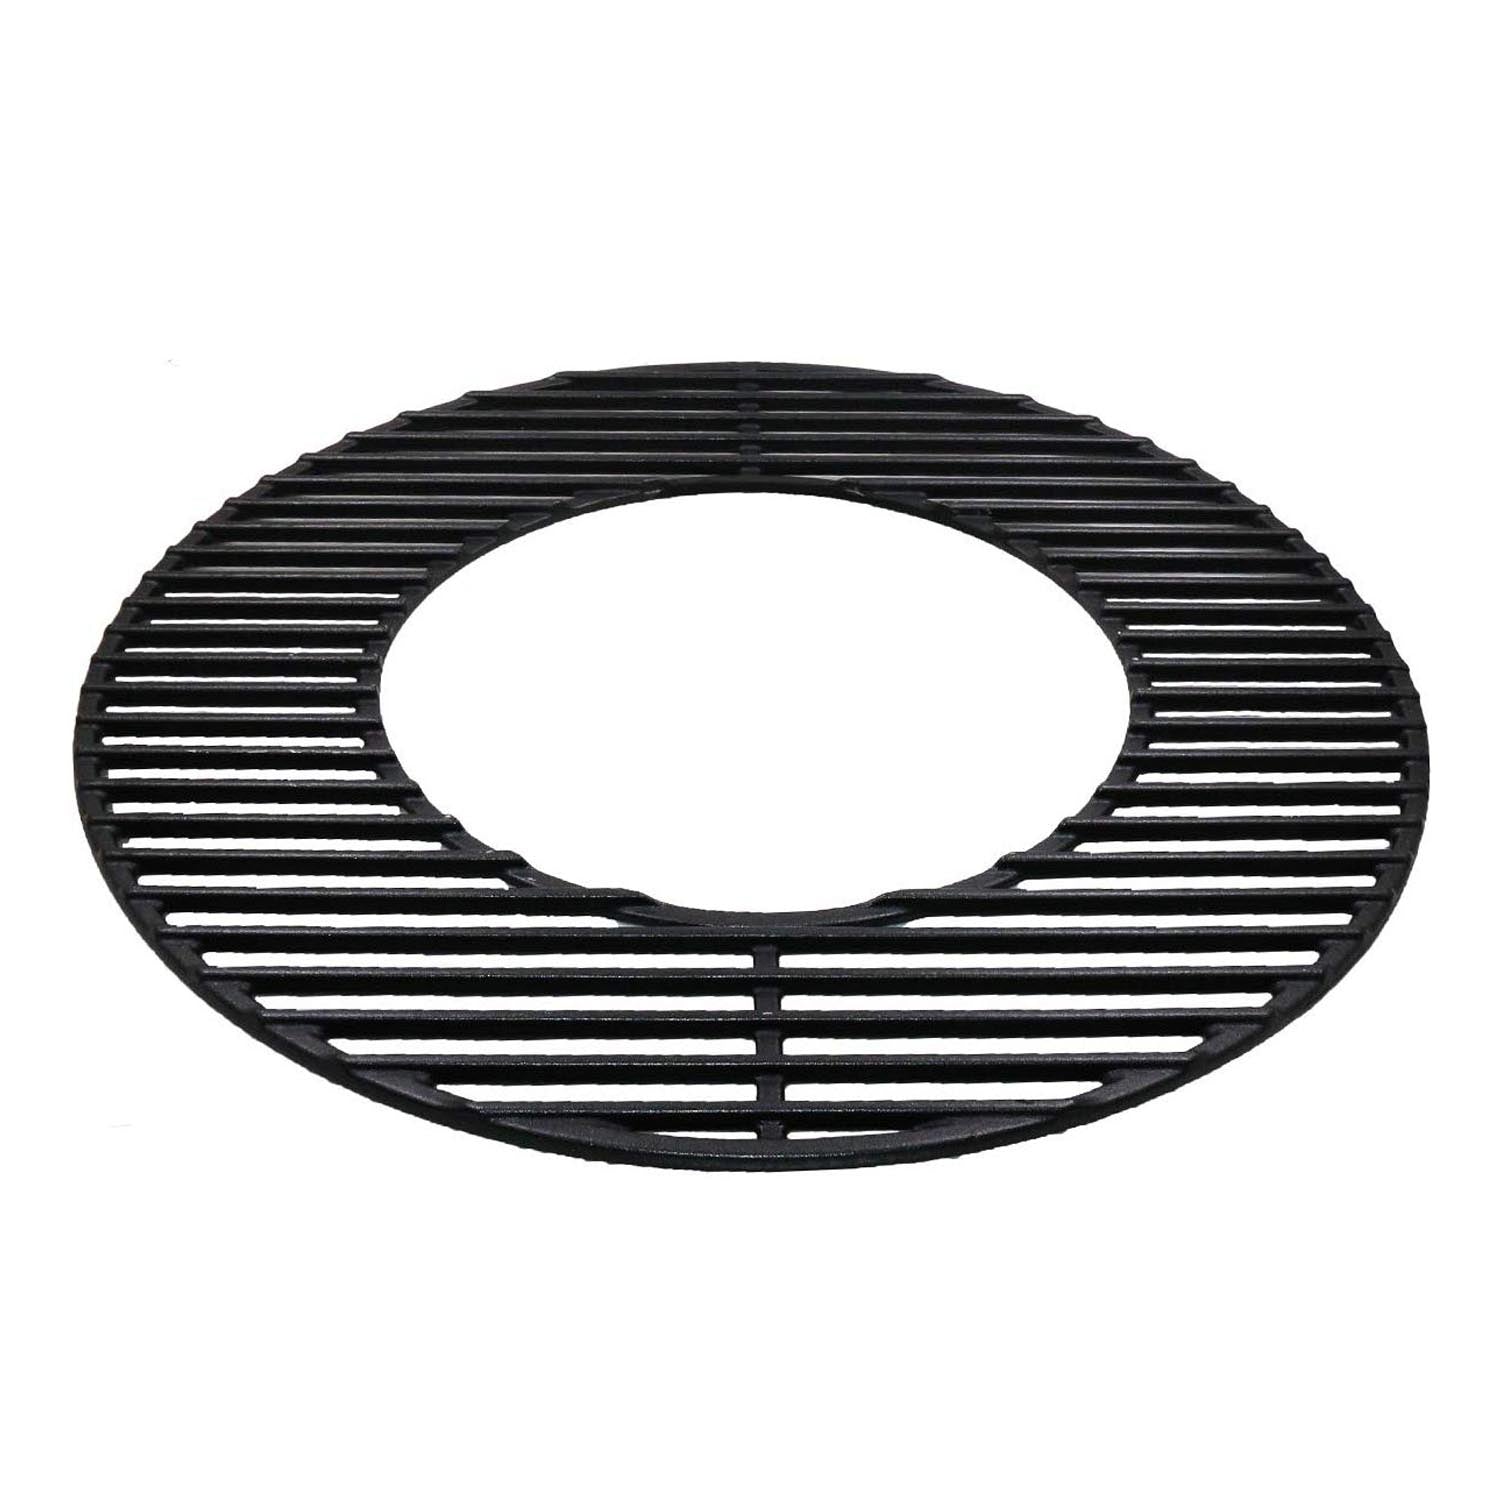 Adviace 7645 65811 Cast Iron Grill Cooking Grates Replacement for